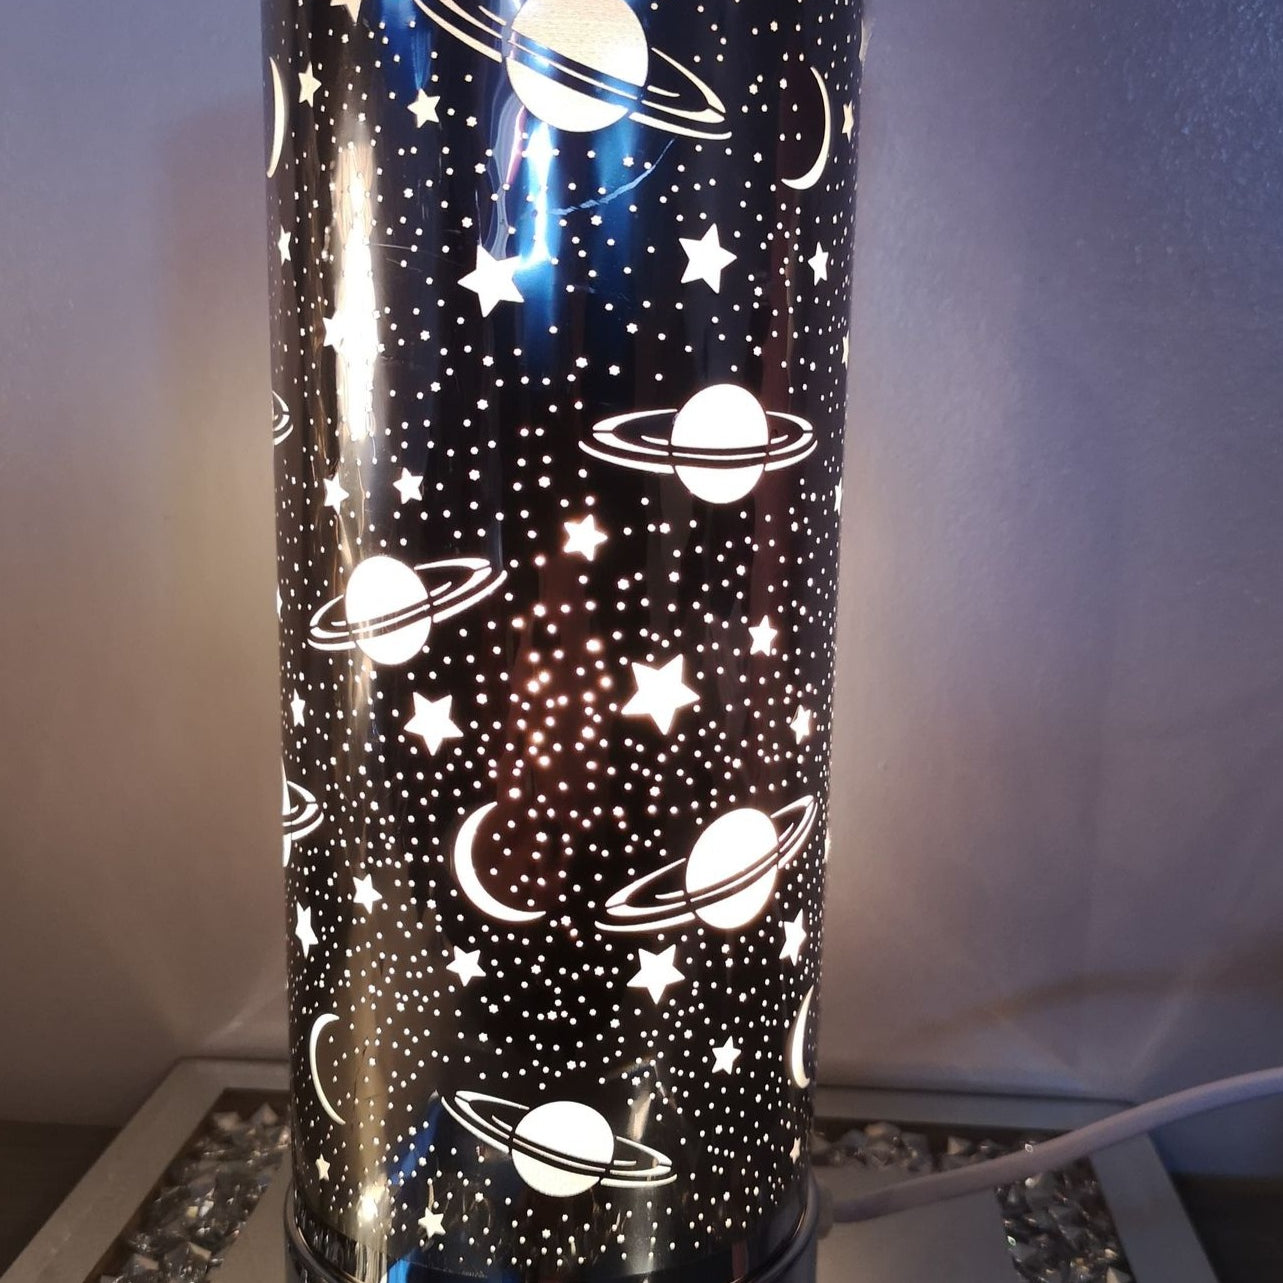 Silver Tall Universe Design Touch Controlled Aroma Lamp - Stars & Moons